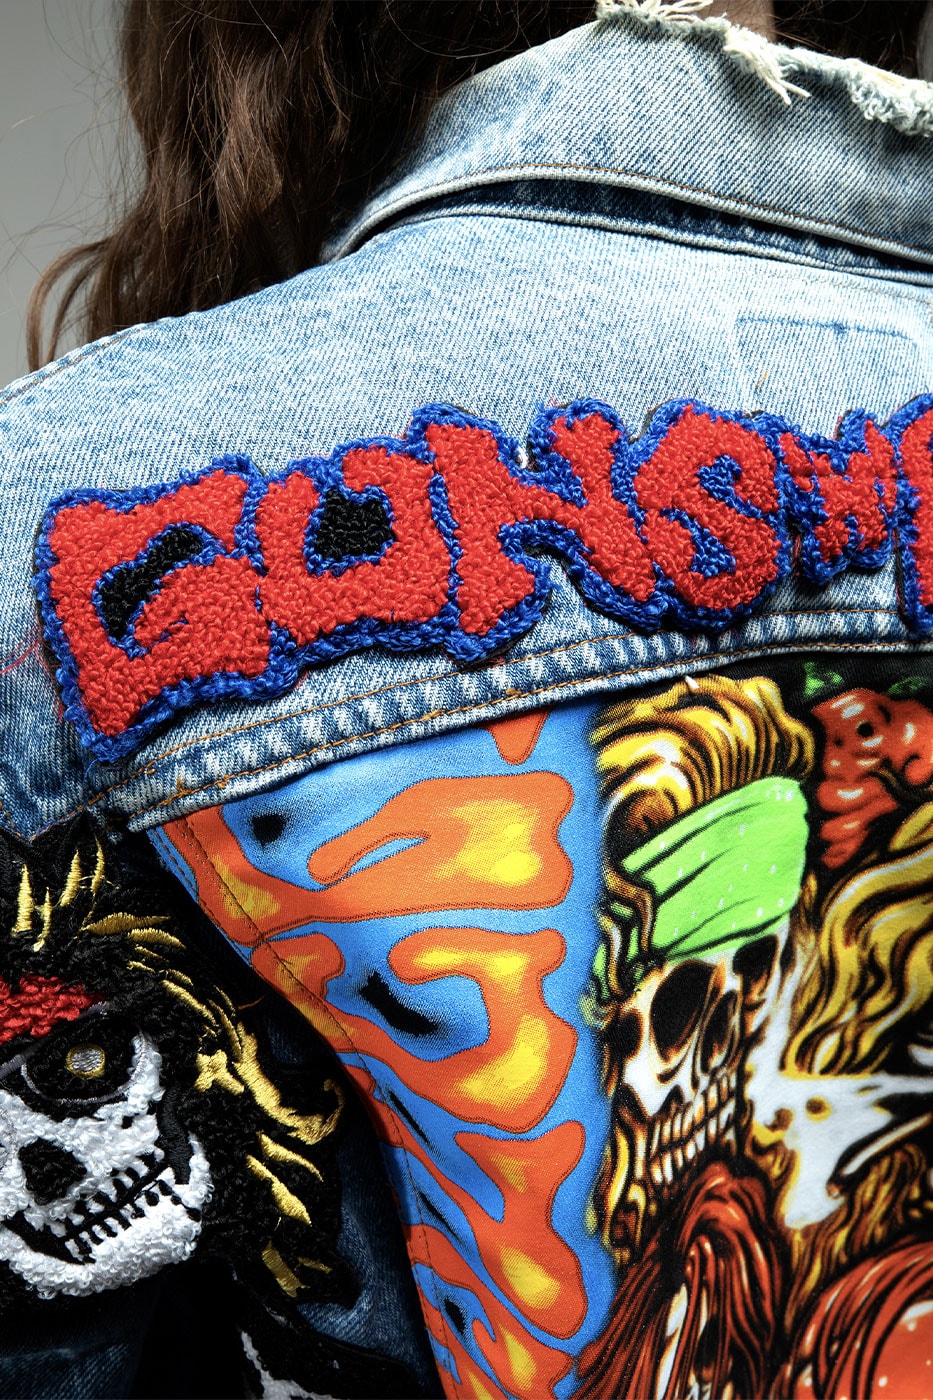 MARKET GUNS N ROSES Smiley collaboration collection denim tees jeans jackets graphics release info date price